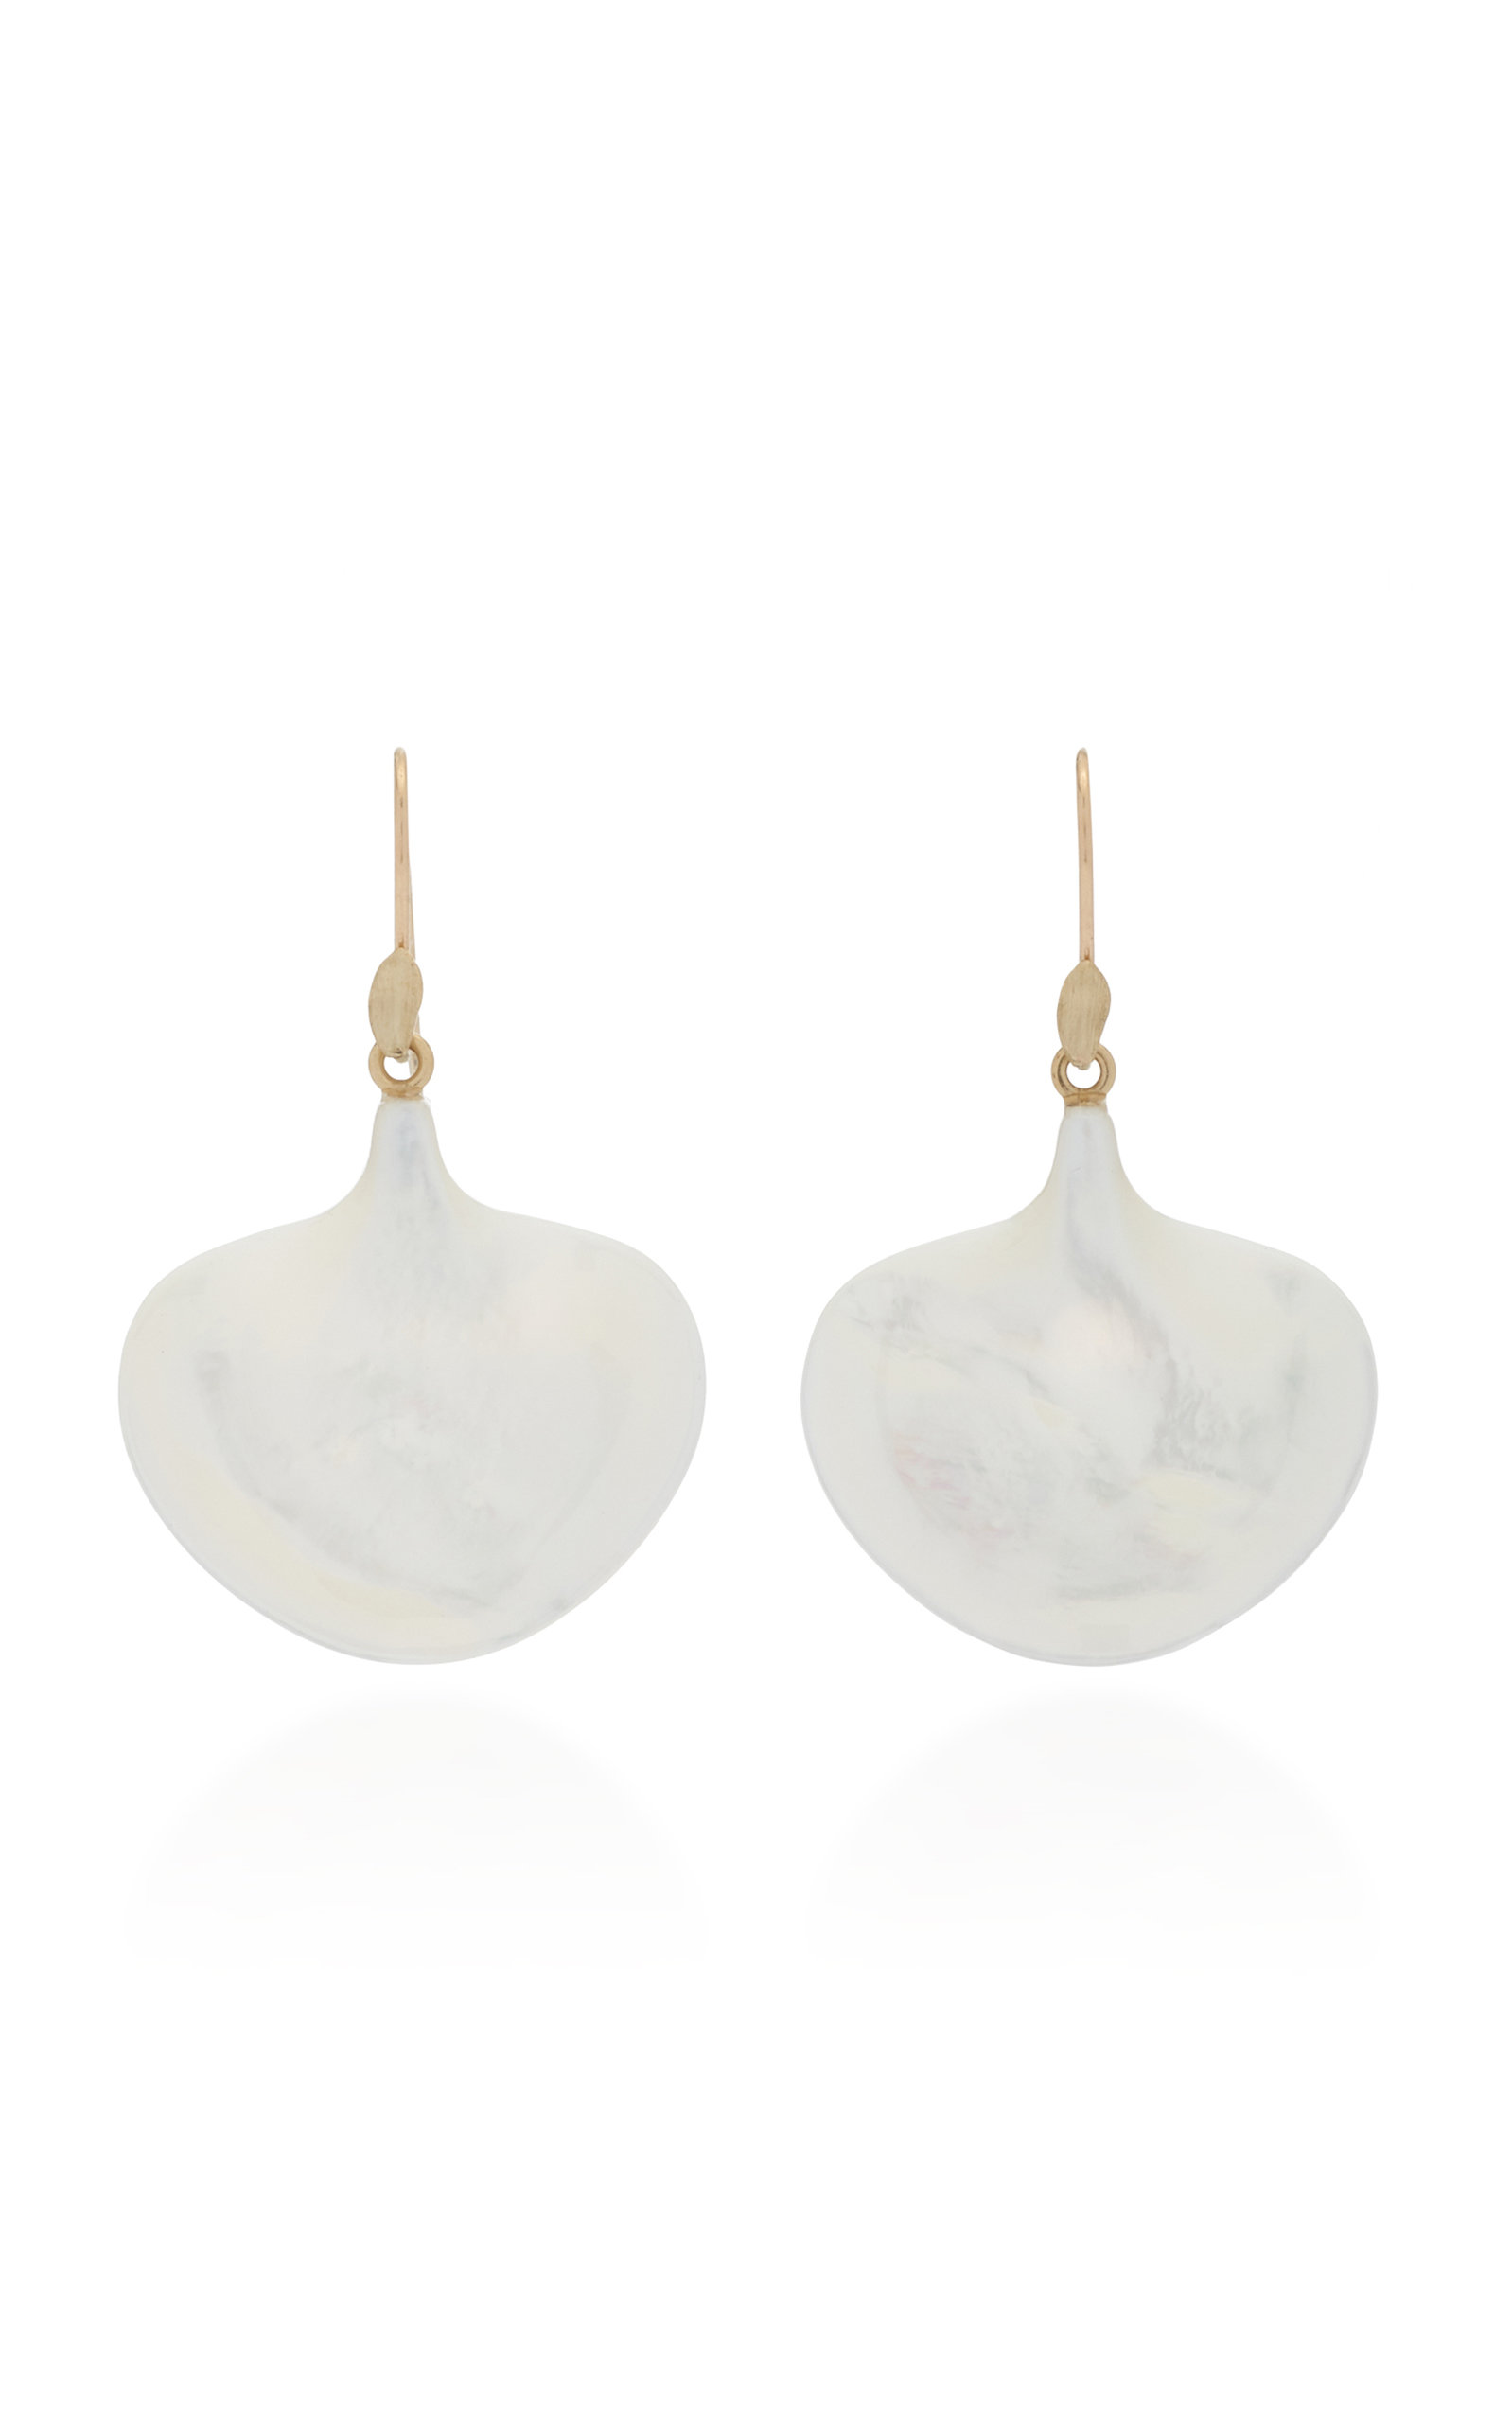 Medium Ginkgo Leaf 14K Yellow Gold Mother-of-Pearl Earrings